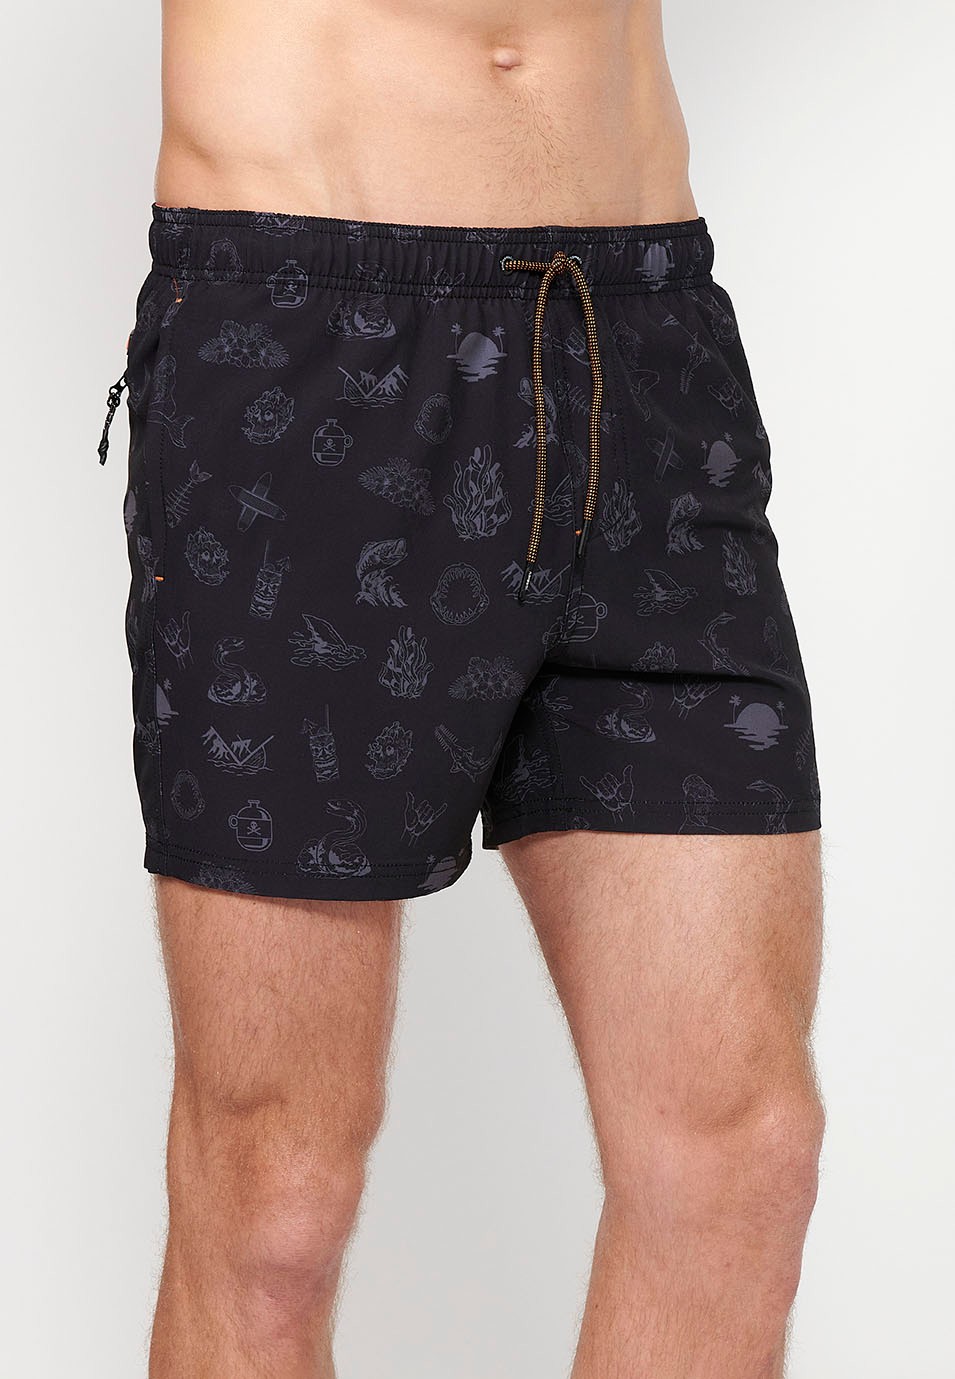 Printed short swimsuit with adjustable waist with drawstring and back pocket and an inner gray color for men 2